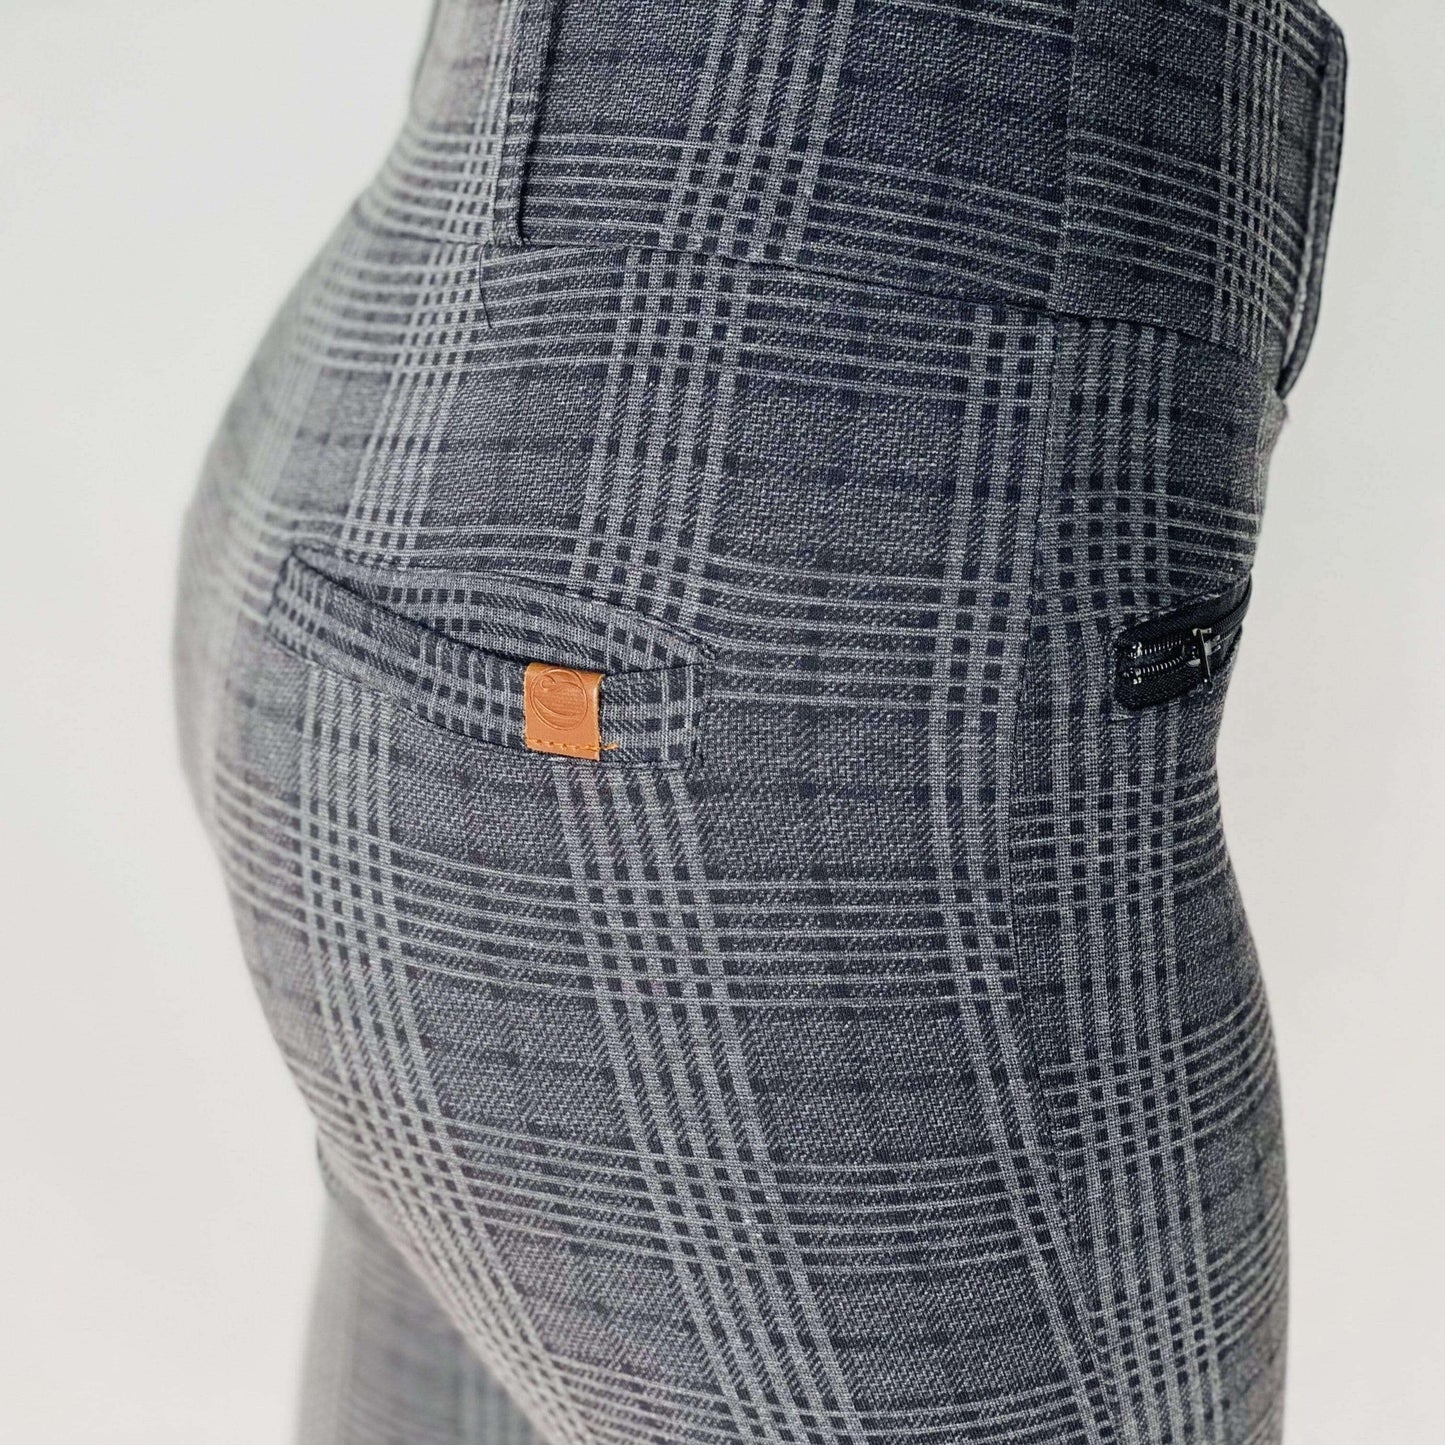 LaaTeeDa Sports Pants Size 0-2 SMALL But Fierce / Plaid / Cotton, Nylon, Polyester, Spandex blend LaaTeeDa Women’s Golf Pants - Slim Fitted, Pull On Design With Zipper Front Mock Pockets and Real Back Pockets - Dark Grey Plaid